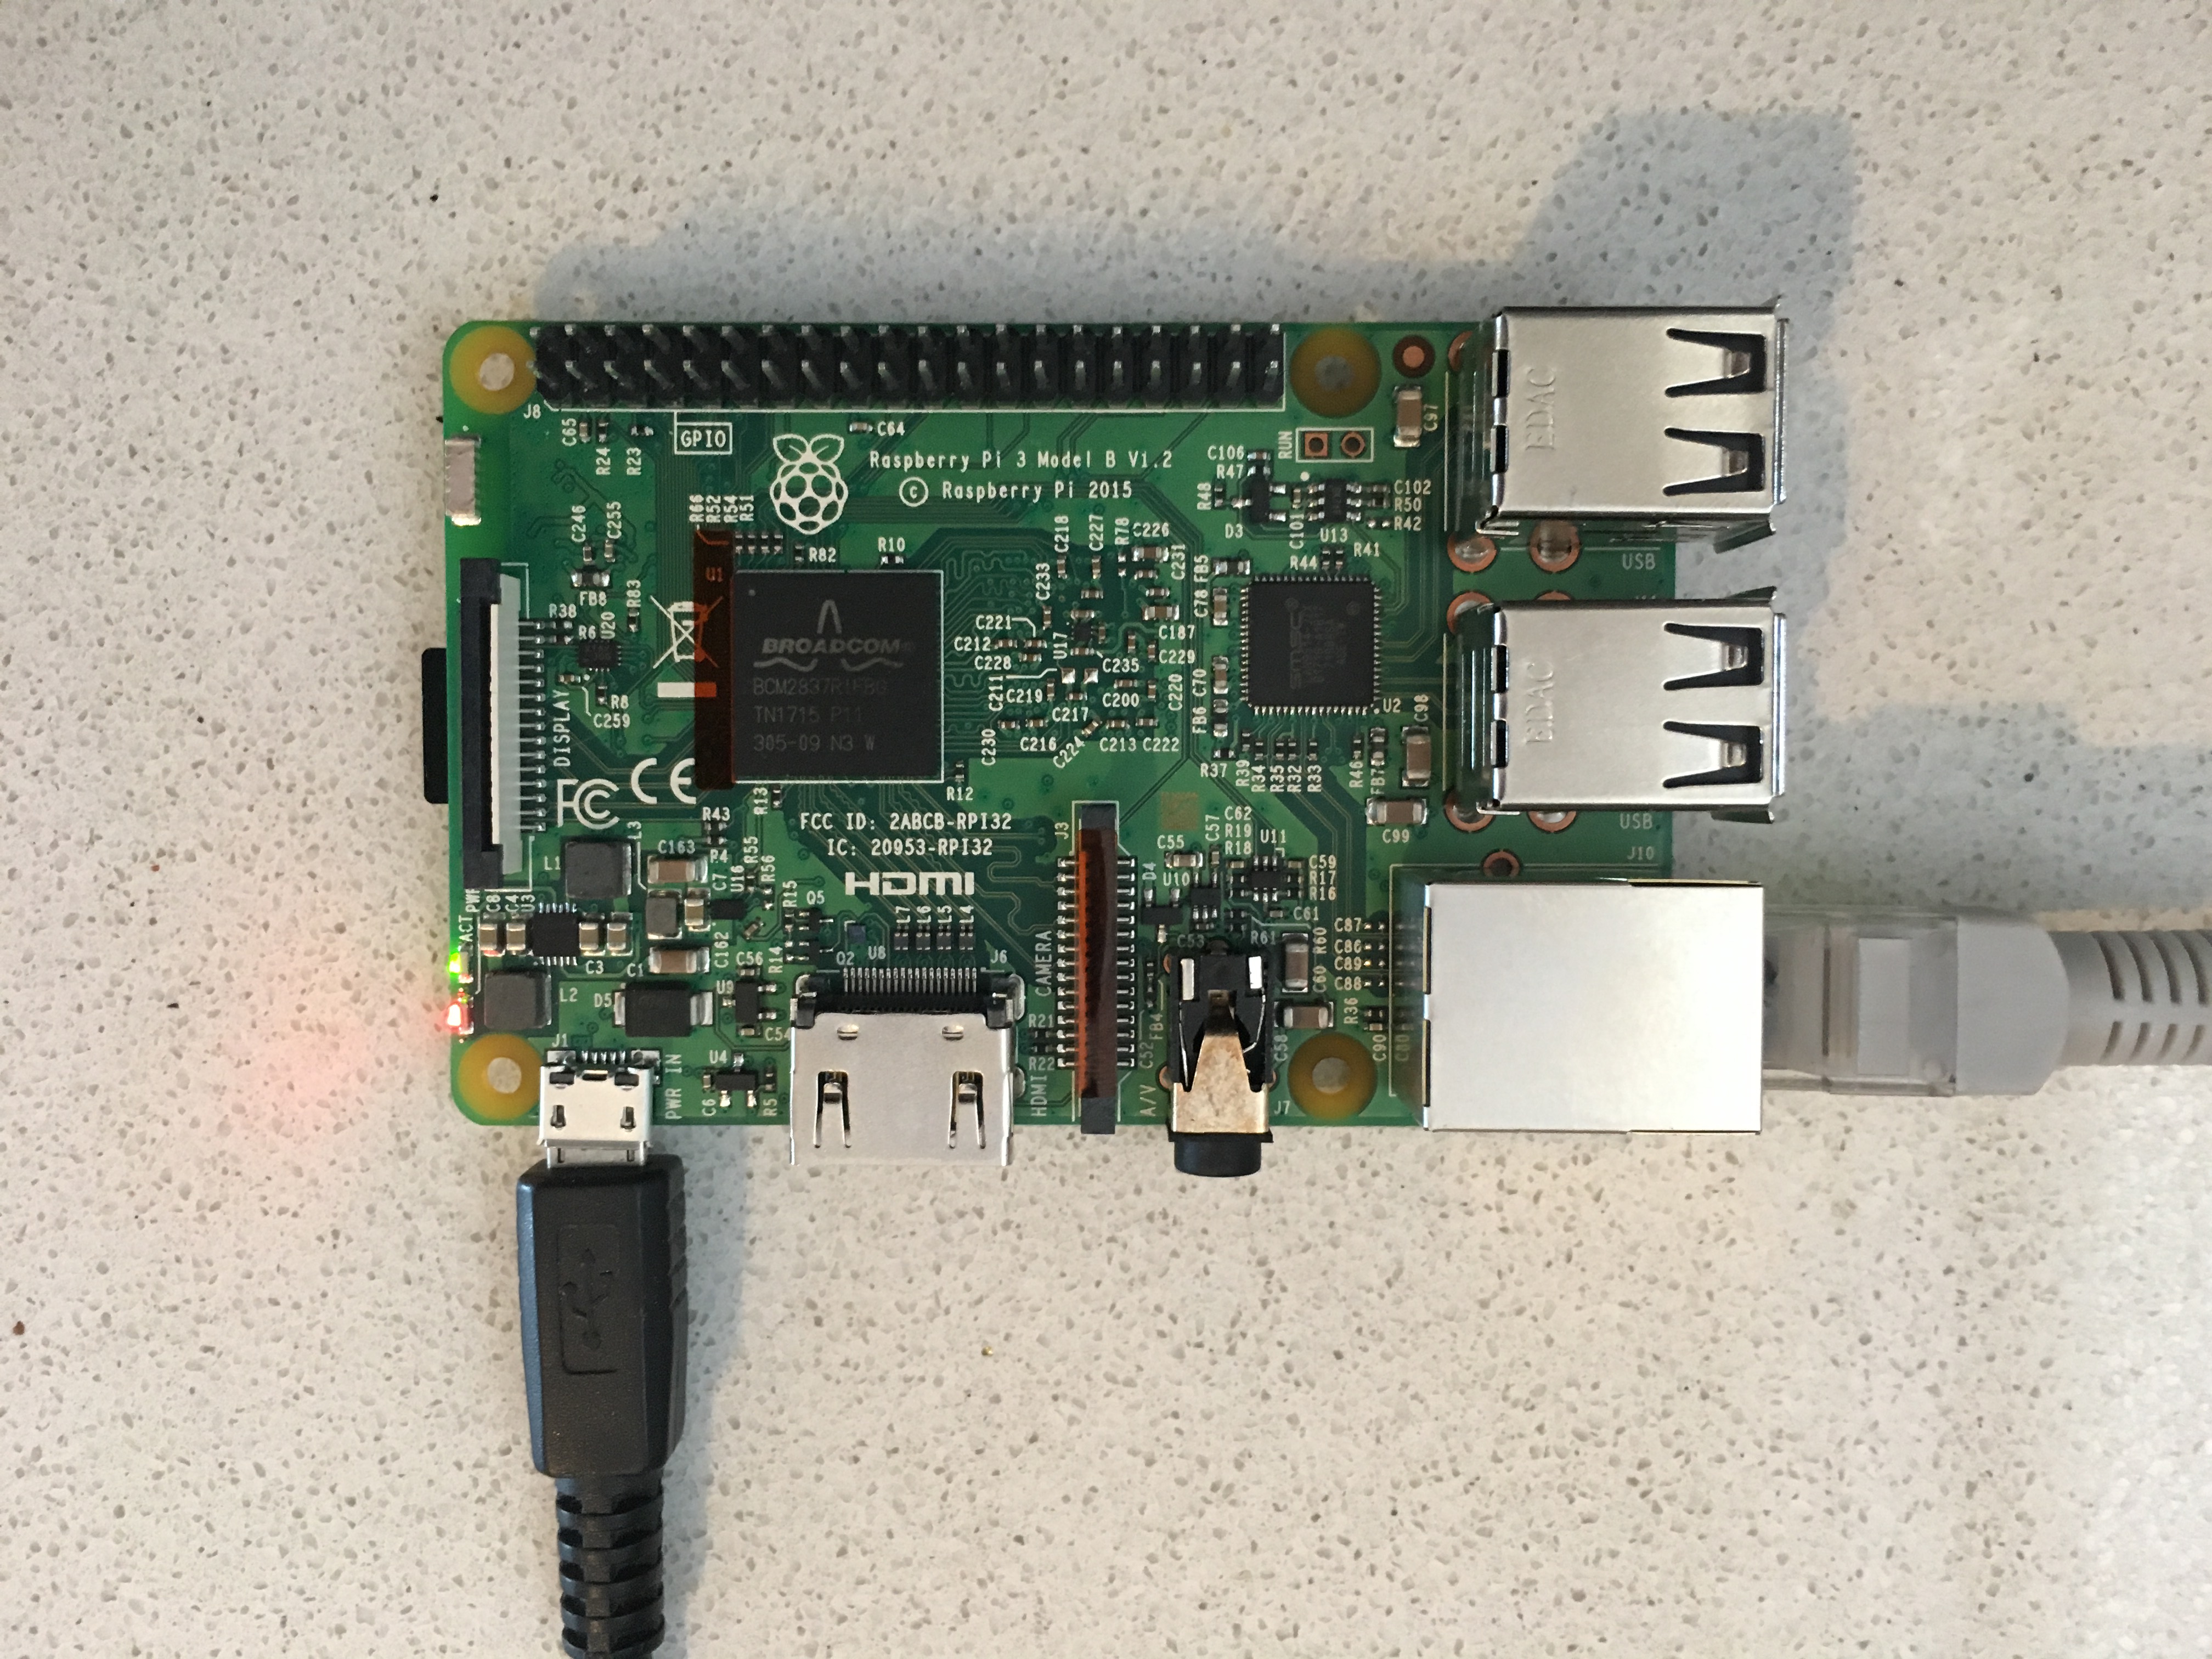 Running A Man-in-the-middle Proxy On A Raspberry Pi 3